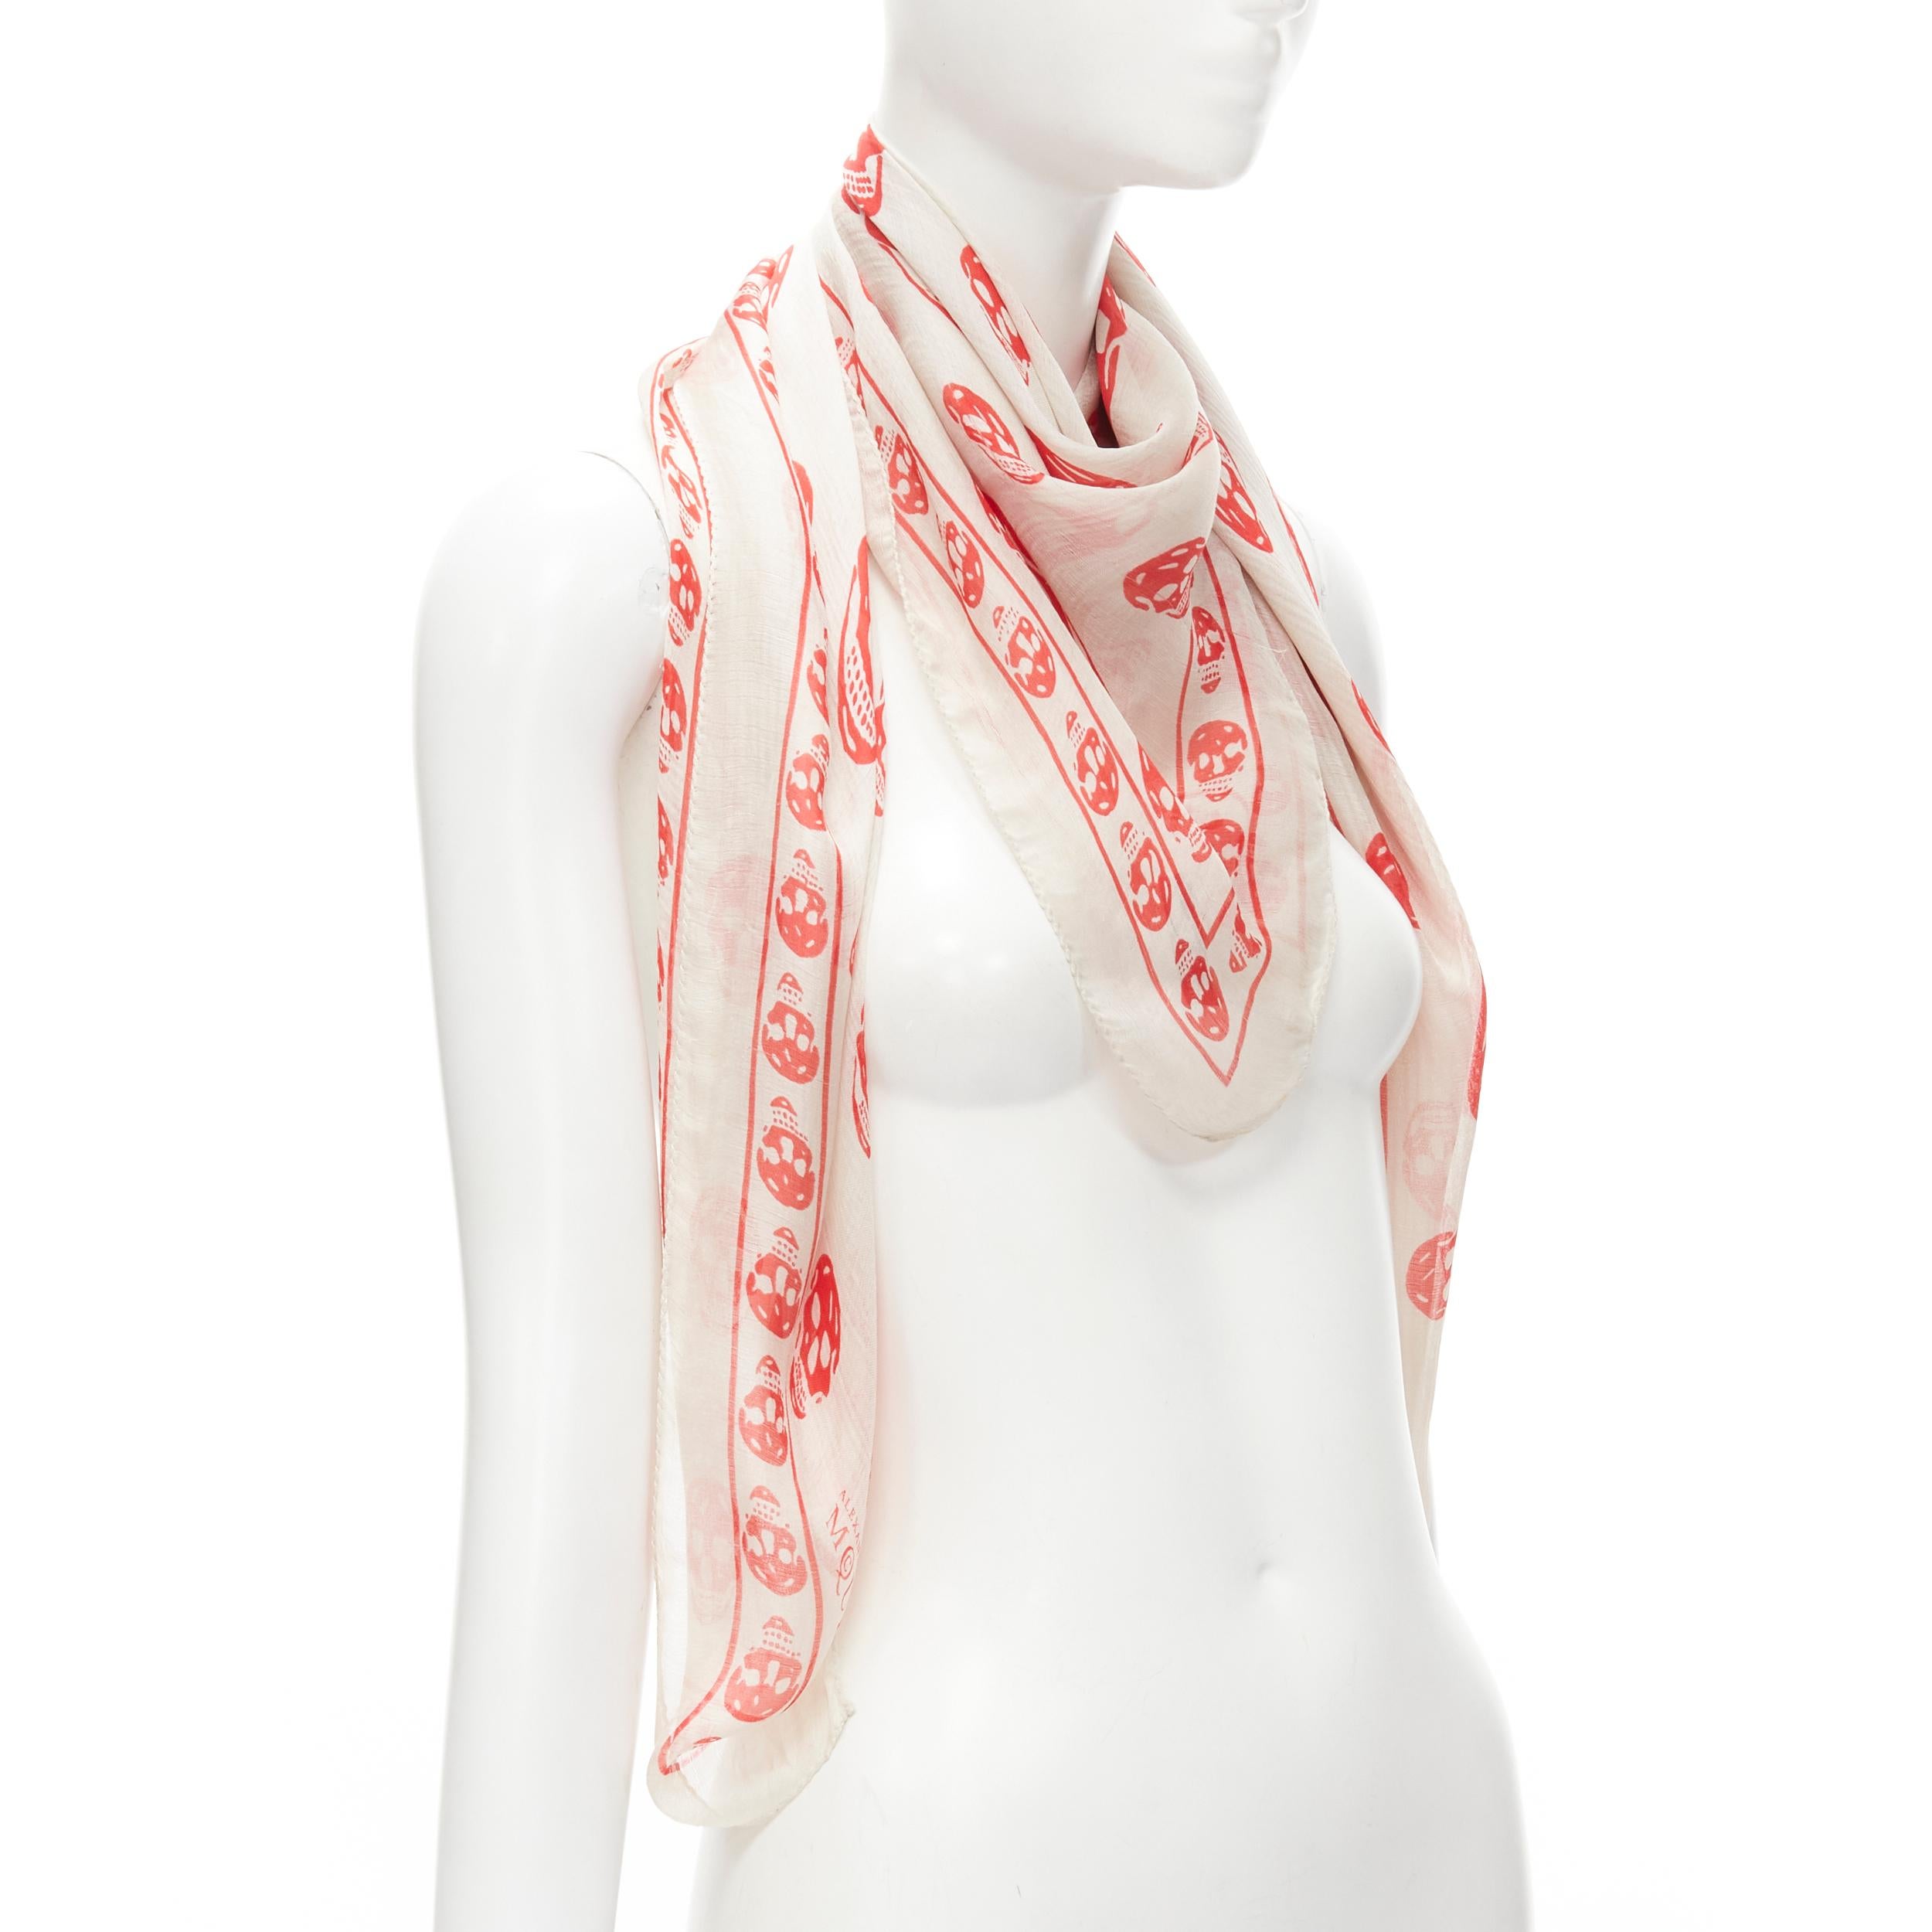 ALEXANDER MCQUEEN Signature skeleton skull light grey red silk scarf 
Reference: ANWU/A00393 
Brand: Alexander McQueen 
Material: Silk 
Color: Grey 
Pattern: Skull 
Made in: Italy 


CONDITION:
Condition: Very good, this item was pre-owned and is in